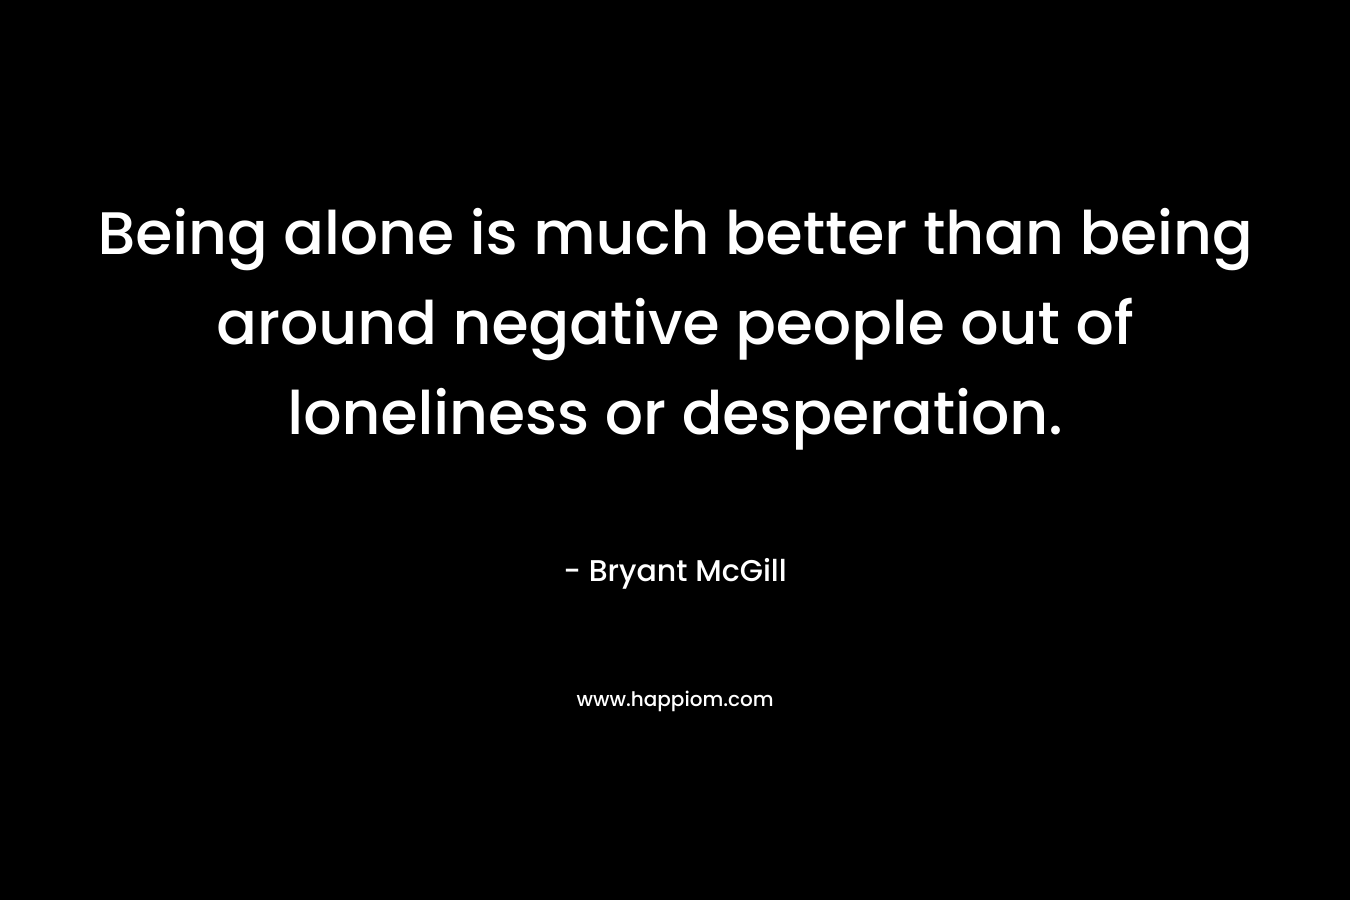 Being alone is much better than being around negative people out of loneliness or desperation. – Bryant McGill